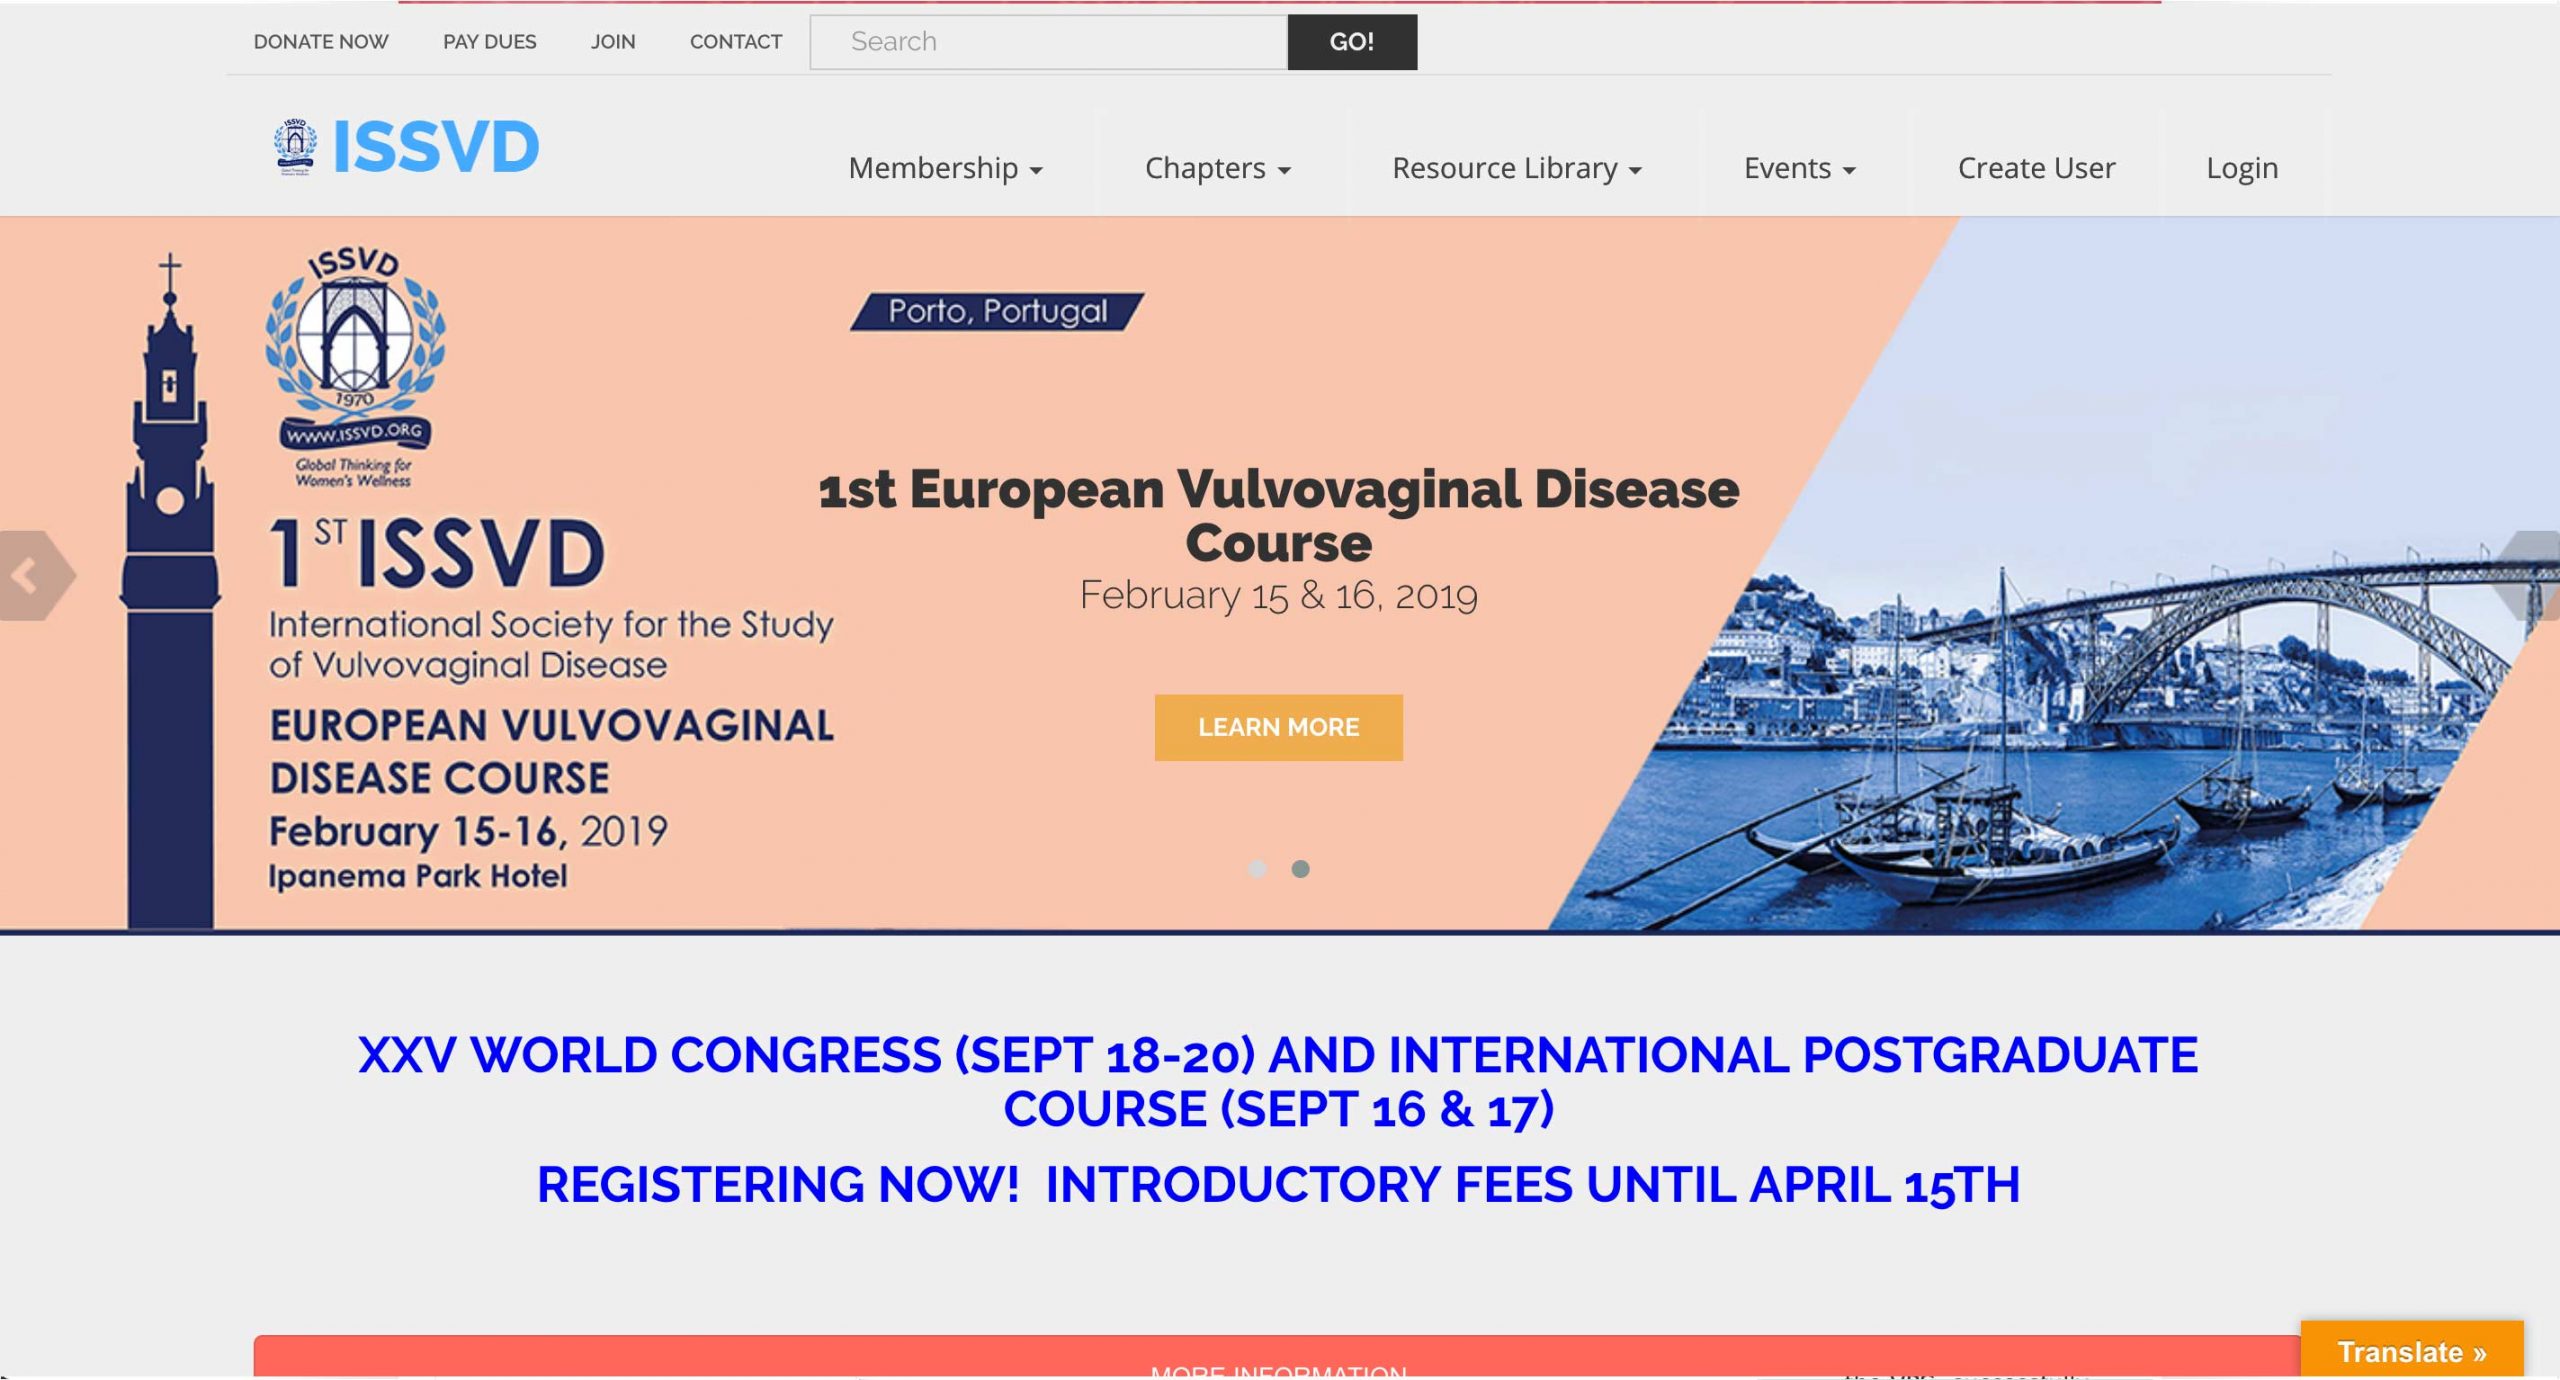 ISSVD - International Society for the Study of Vulvovaginal Diseases - Home Page